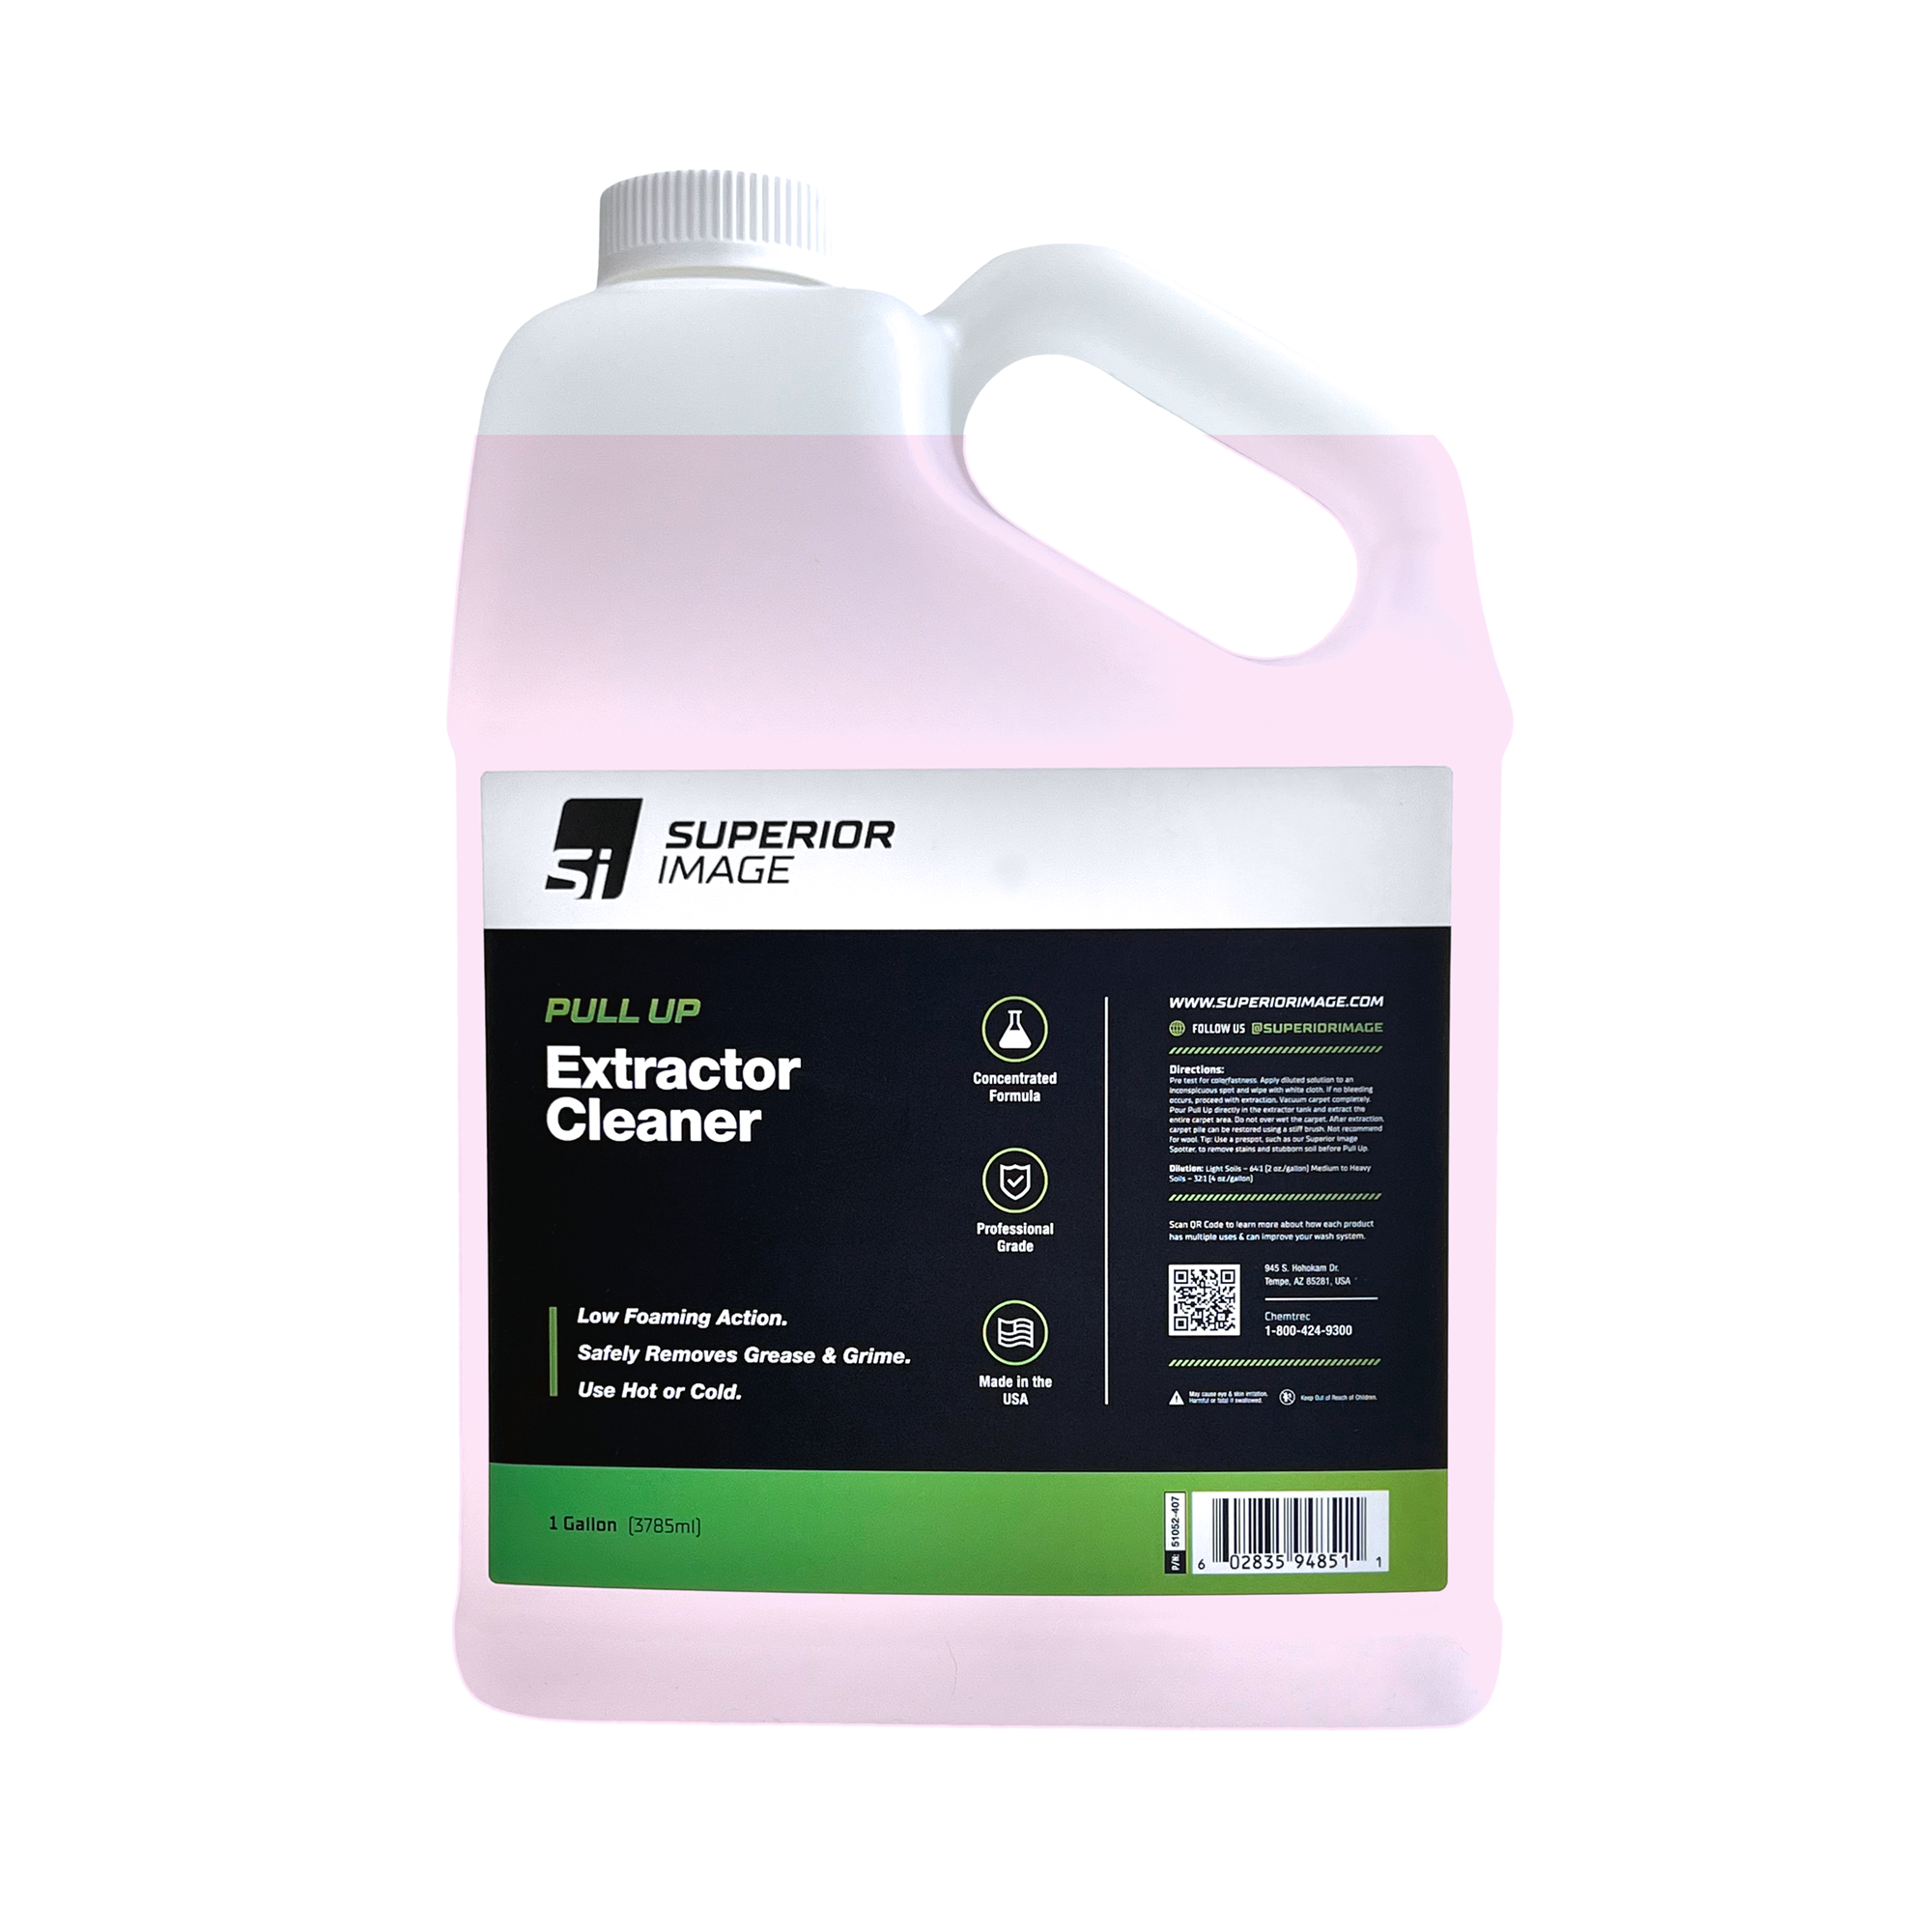 Pull Up Extractor Cleaner